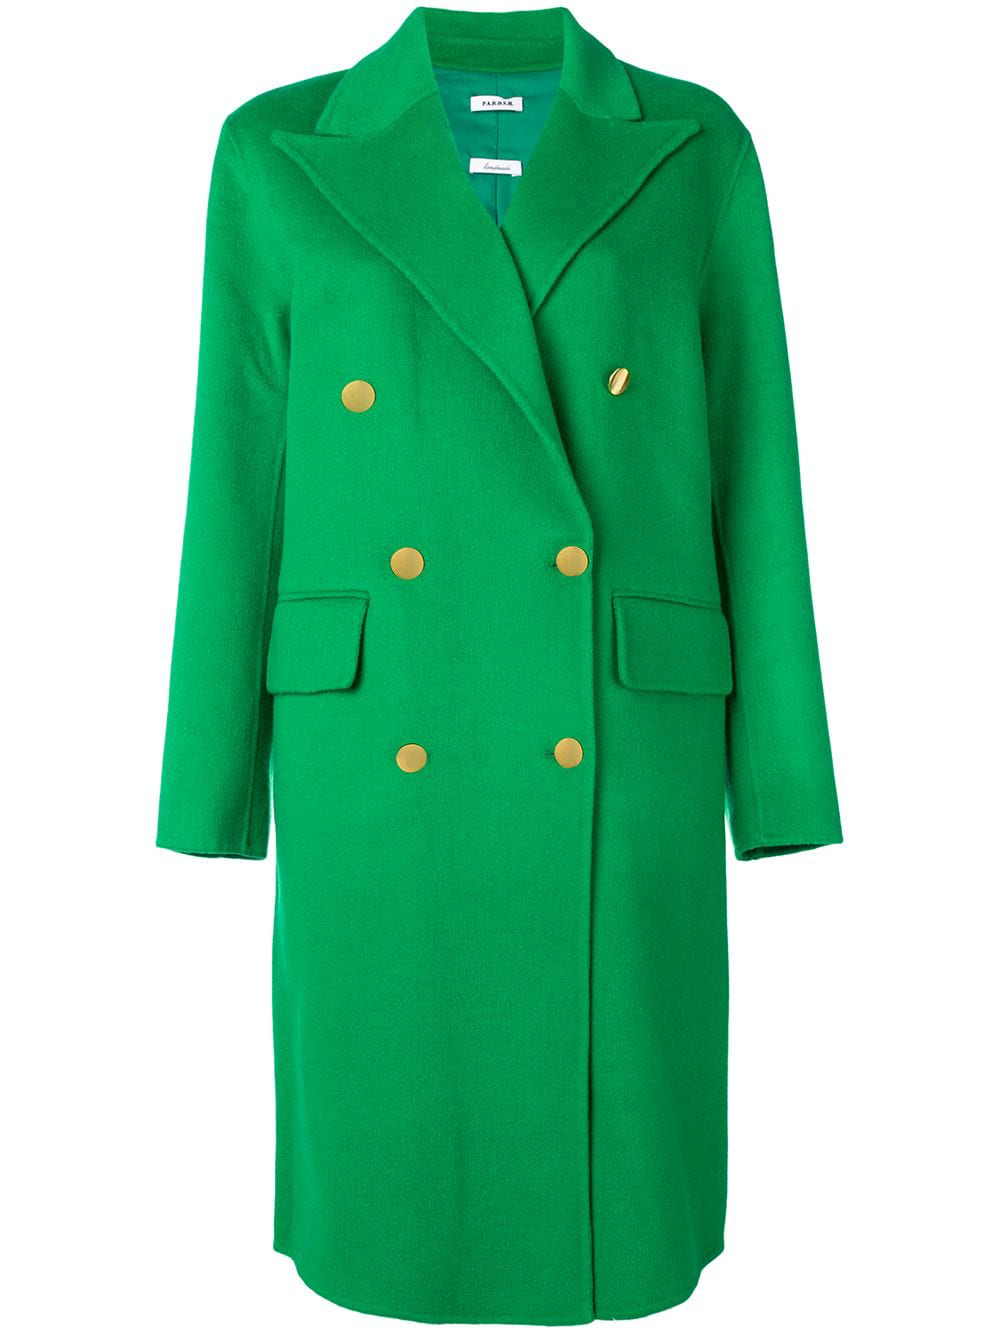 P.A.R.O.S.H. Double Breasted Coat - Farfetch In Green | ModeSens